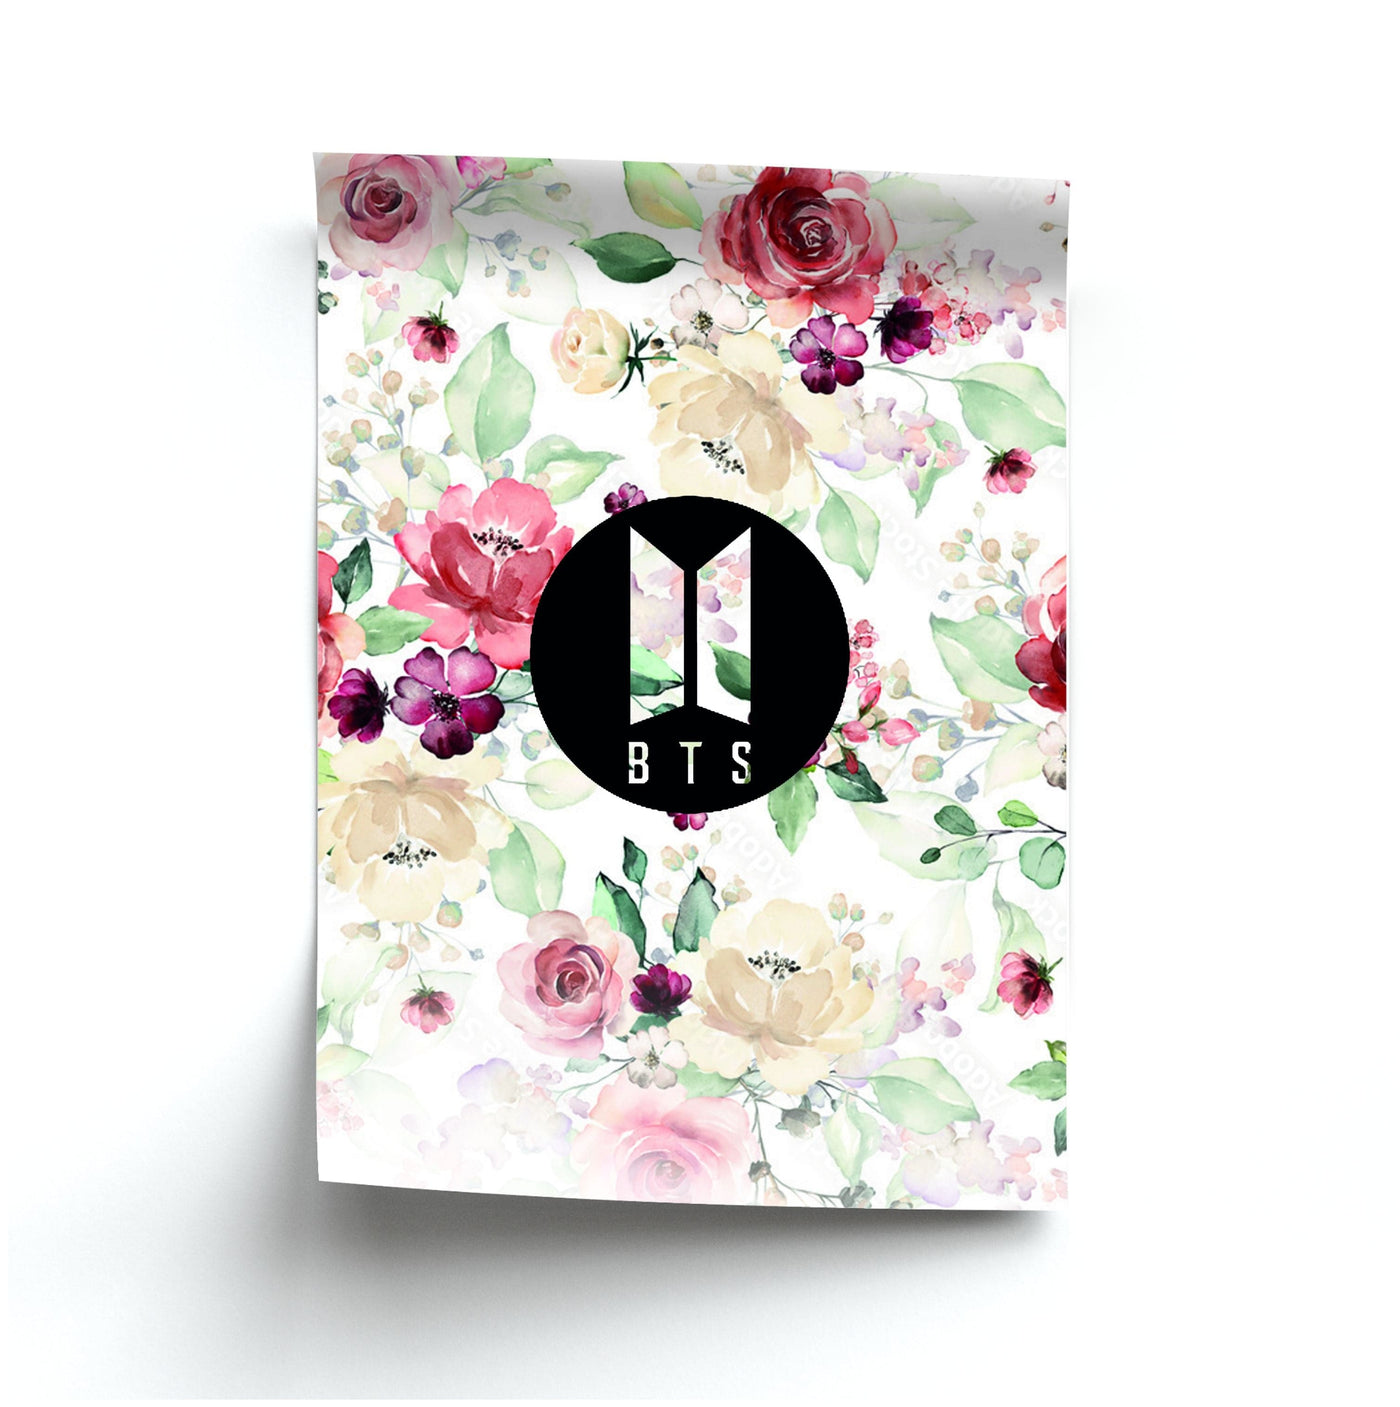 BTS Logo And Flowers - BTS Poster